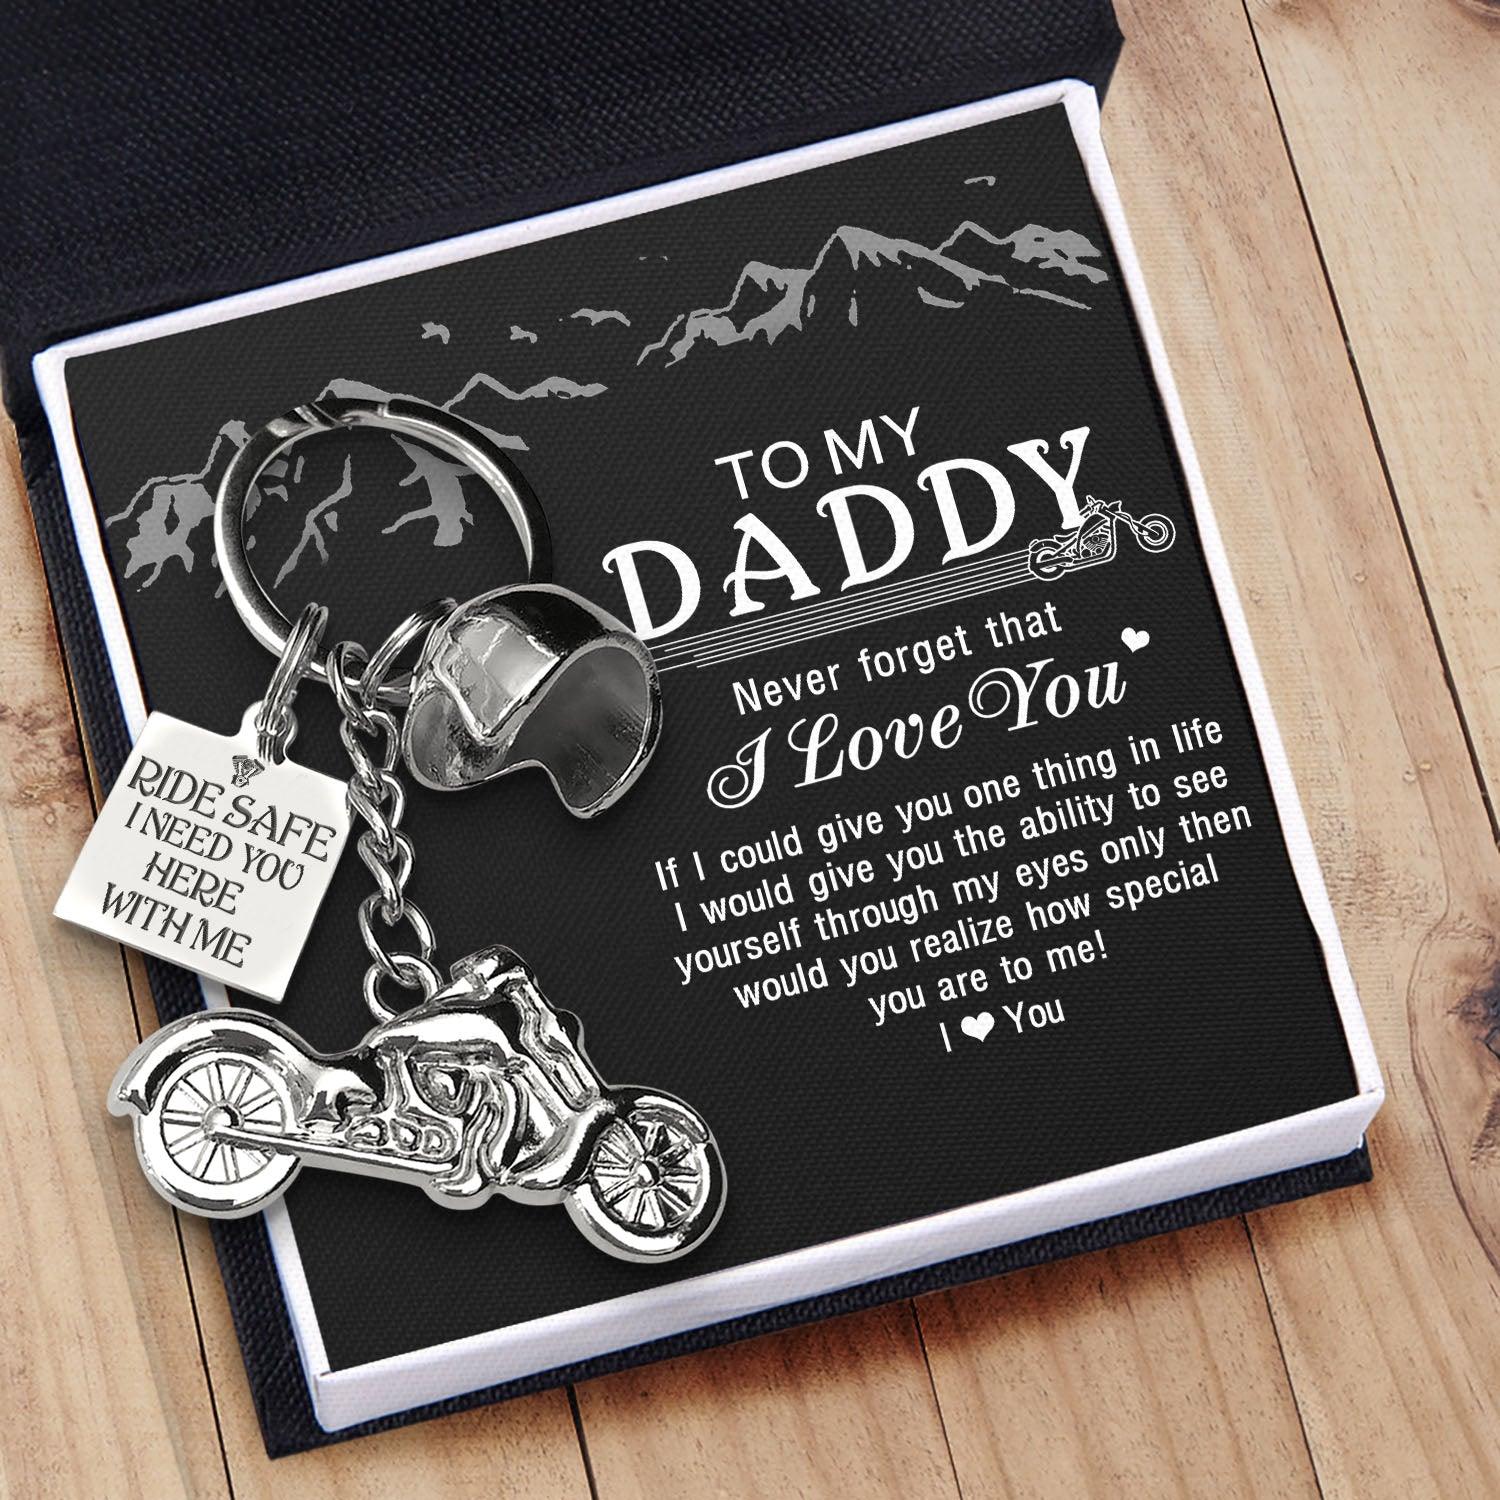 Classic Bike Keychain - Biker - To My Daddy - Ride Safe I Need You Here With Me - Augkt18010 - Gifts Holder